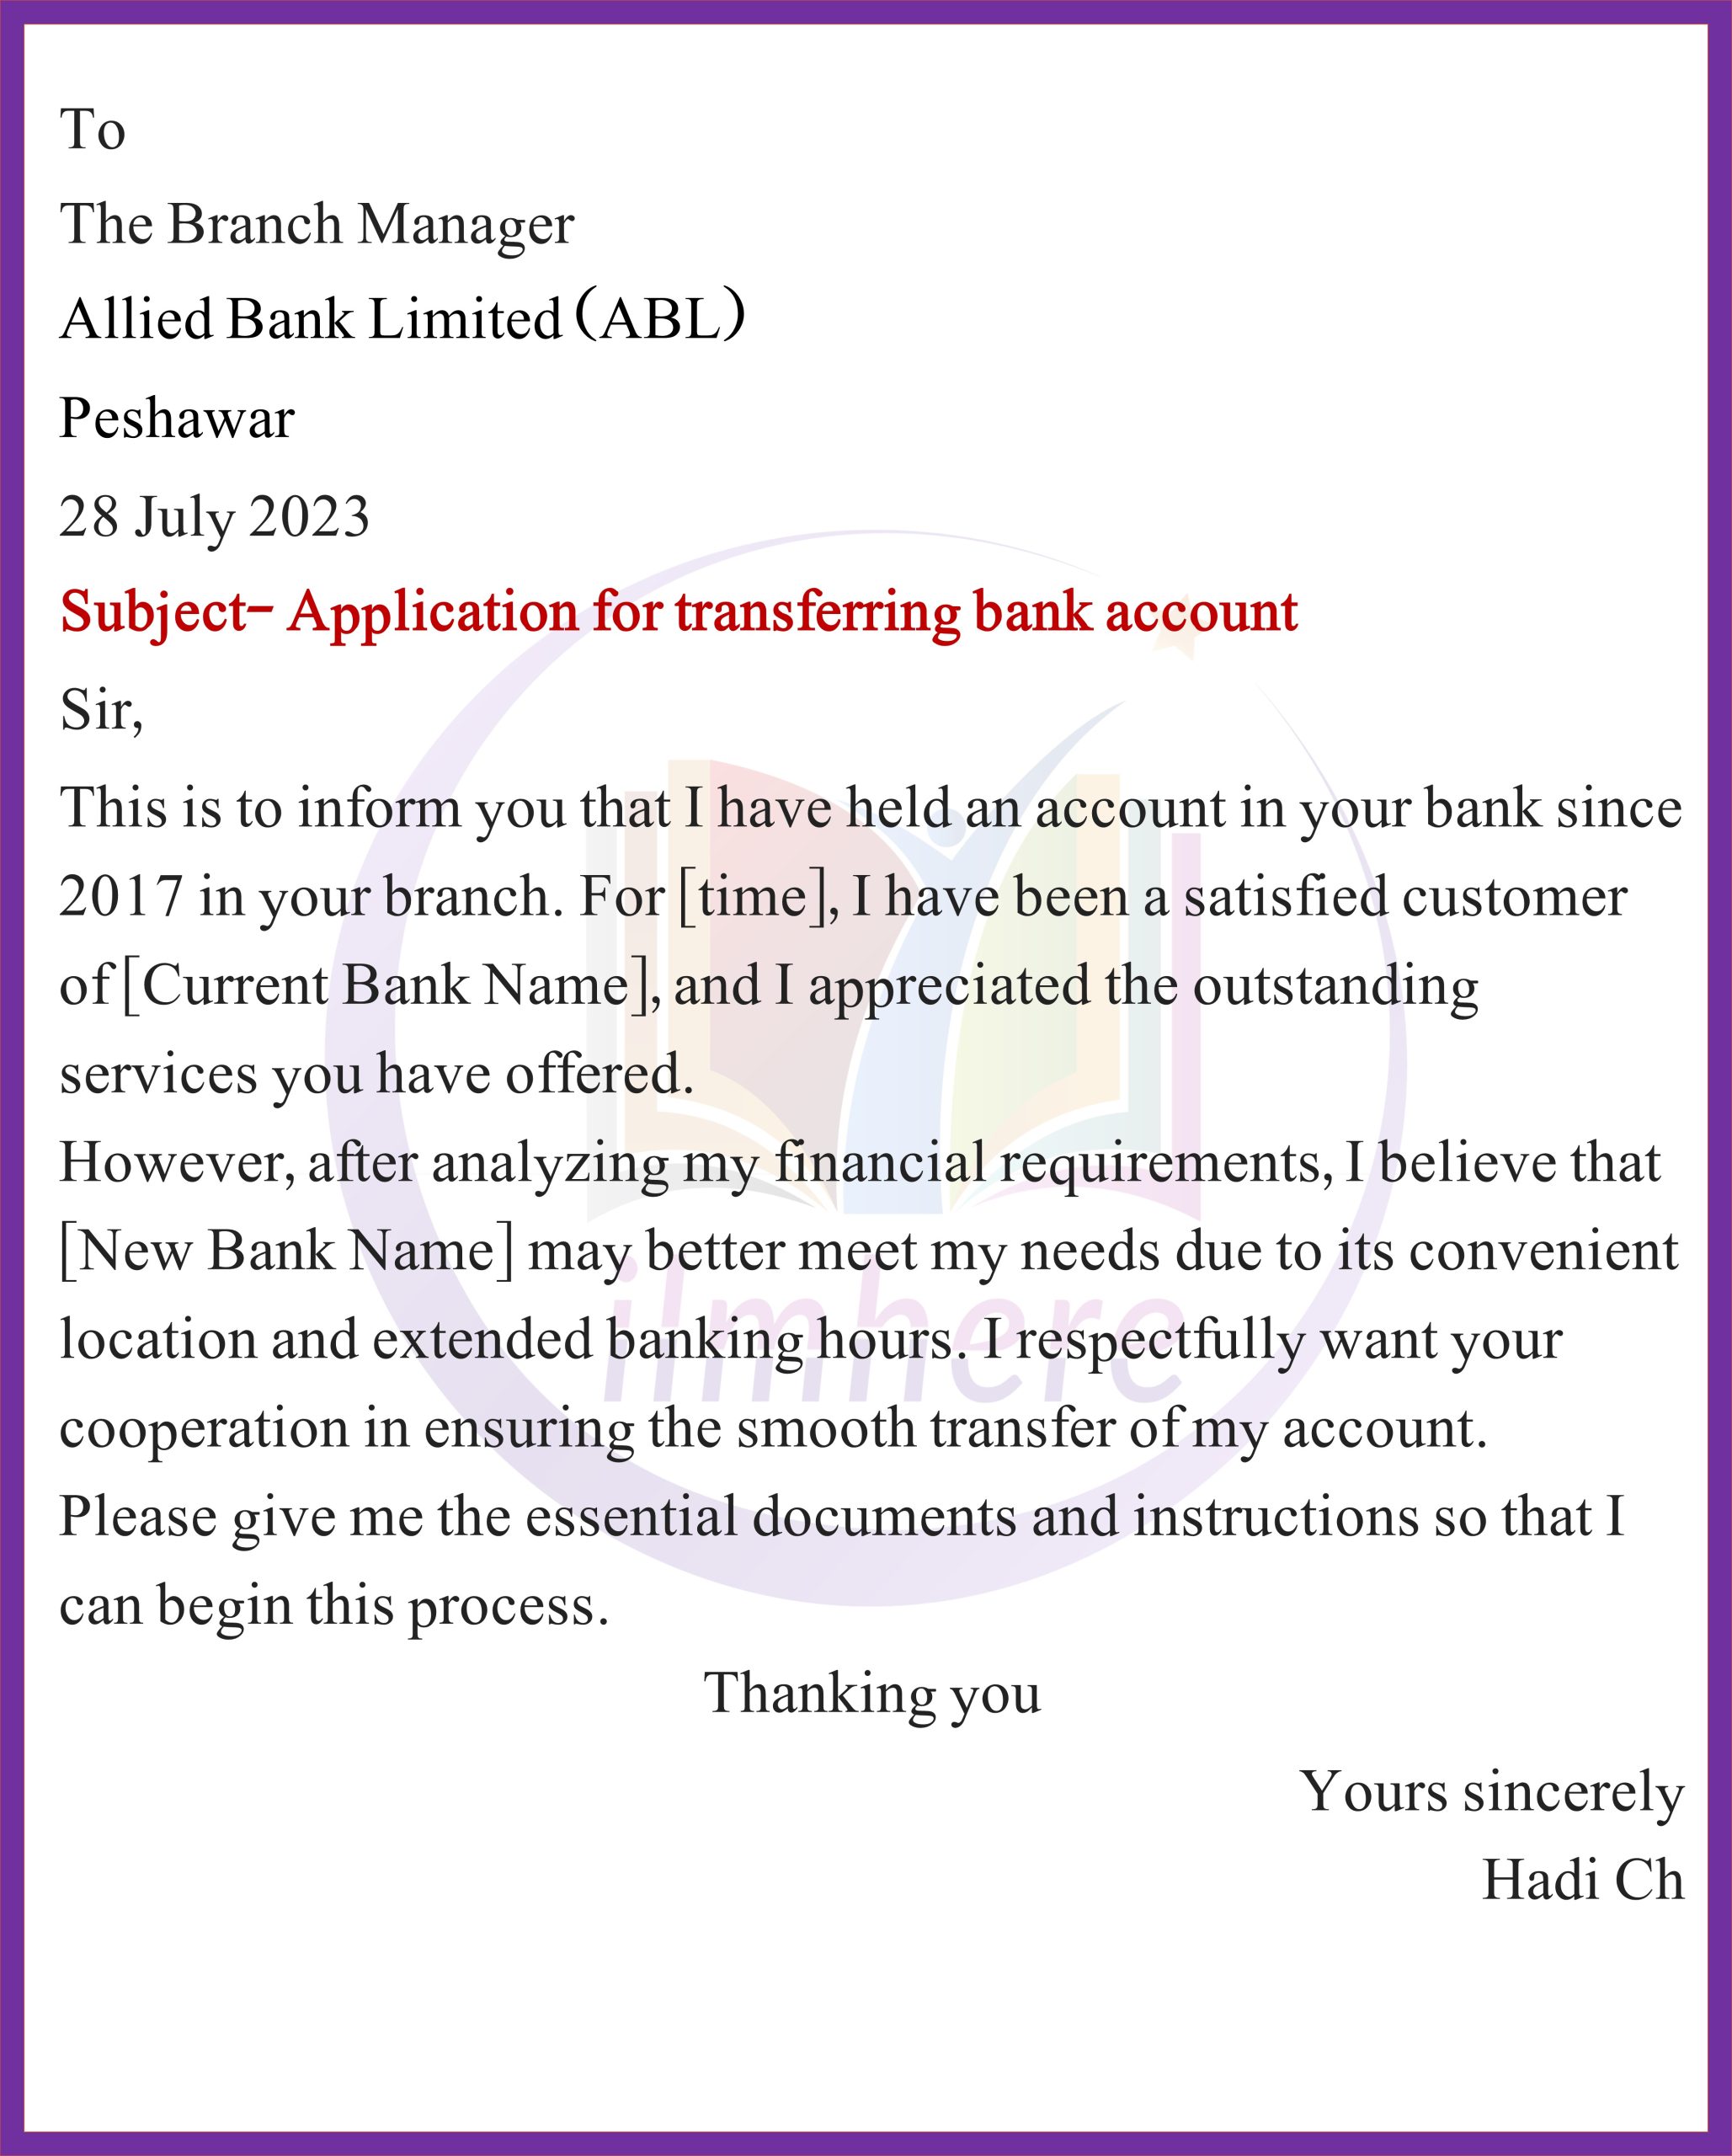 Request for Bank Account Transfer for Convenience (Abl)